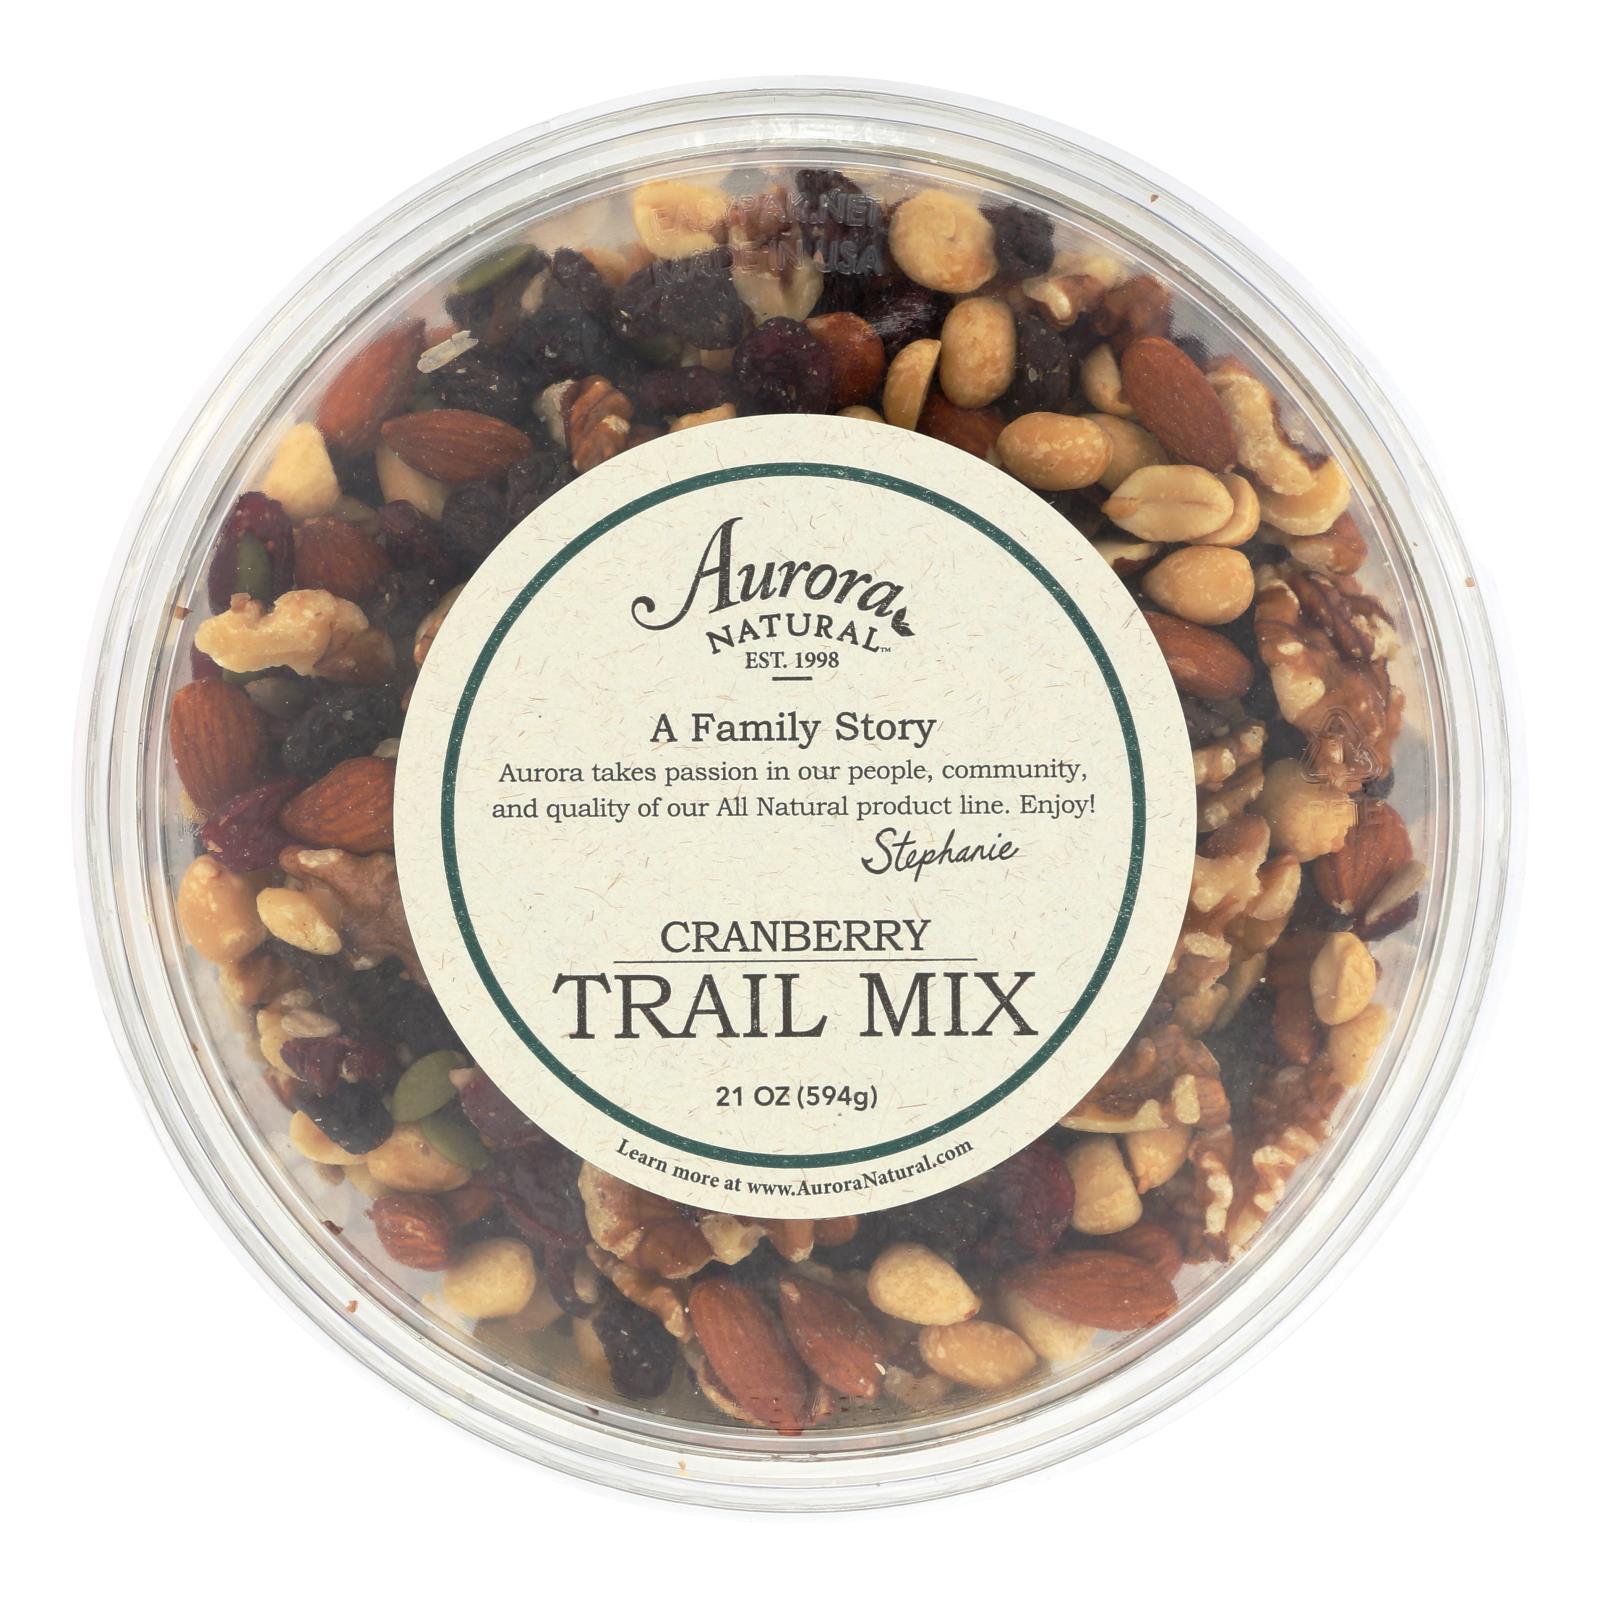 Aurora Natural Products, Aurora Natural Products - Trail Mix - Cranberry - Case of 12 - 21 oz. (Pack of 12)